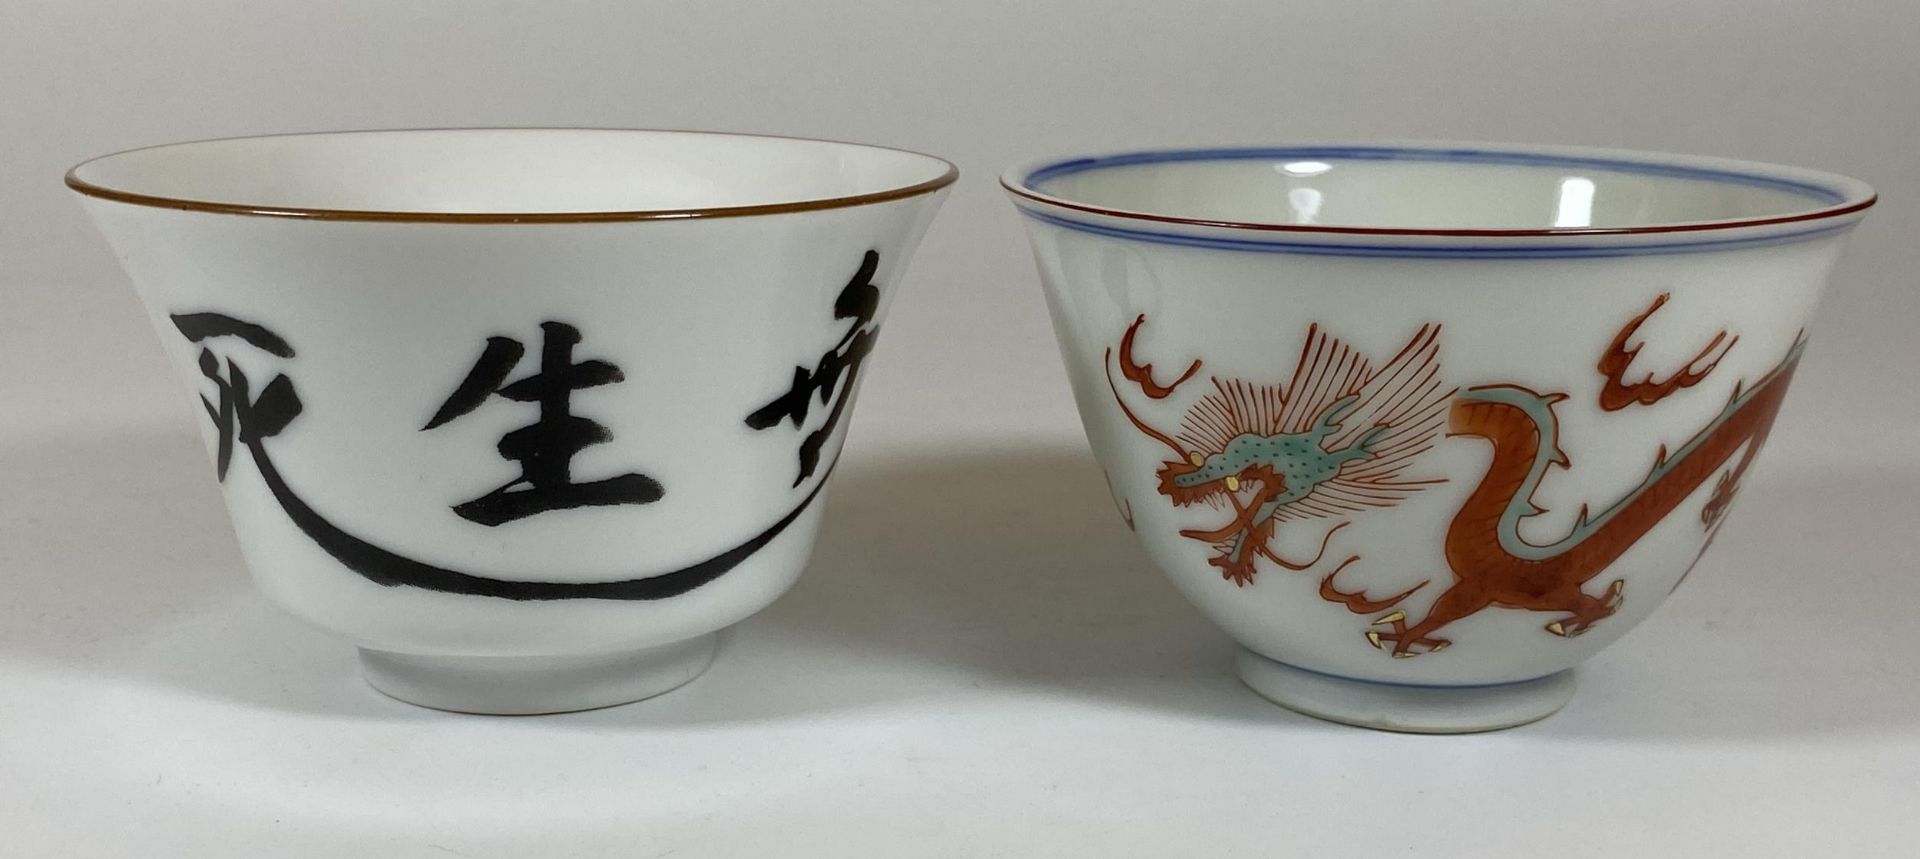 TWO MODERN CHINESE TEA BOWLS, ONE WITH DRAGON DESIGN, MARKED TO BASE, LARGEST DIAMETER 10CM